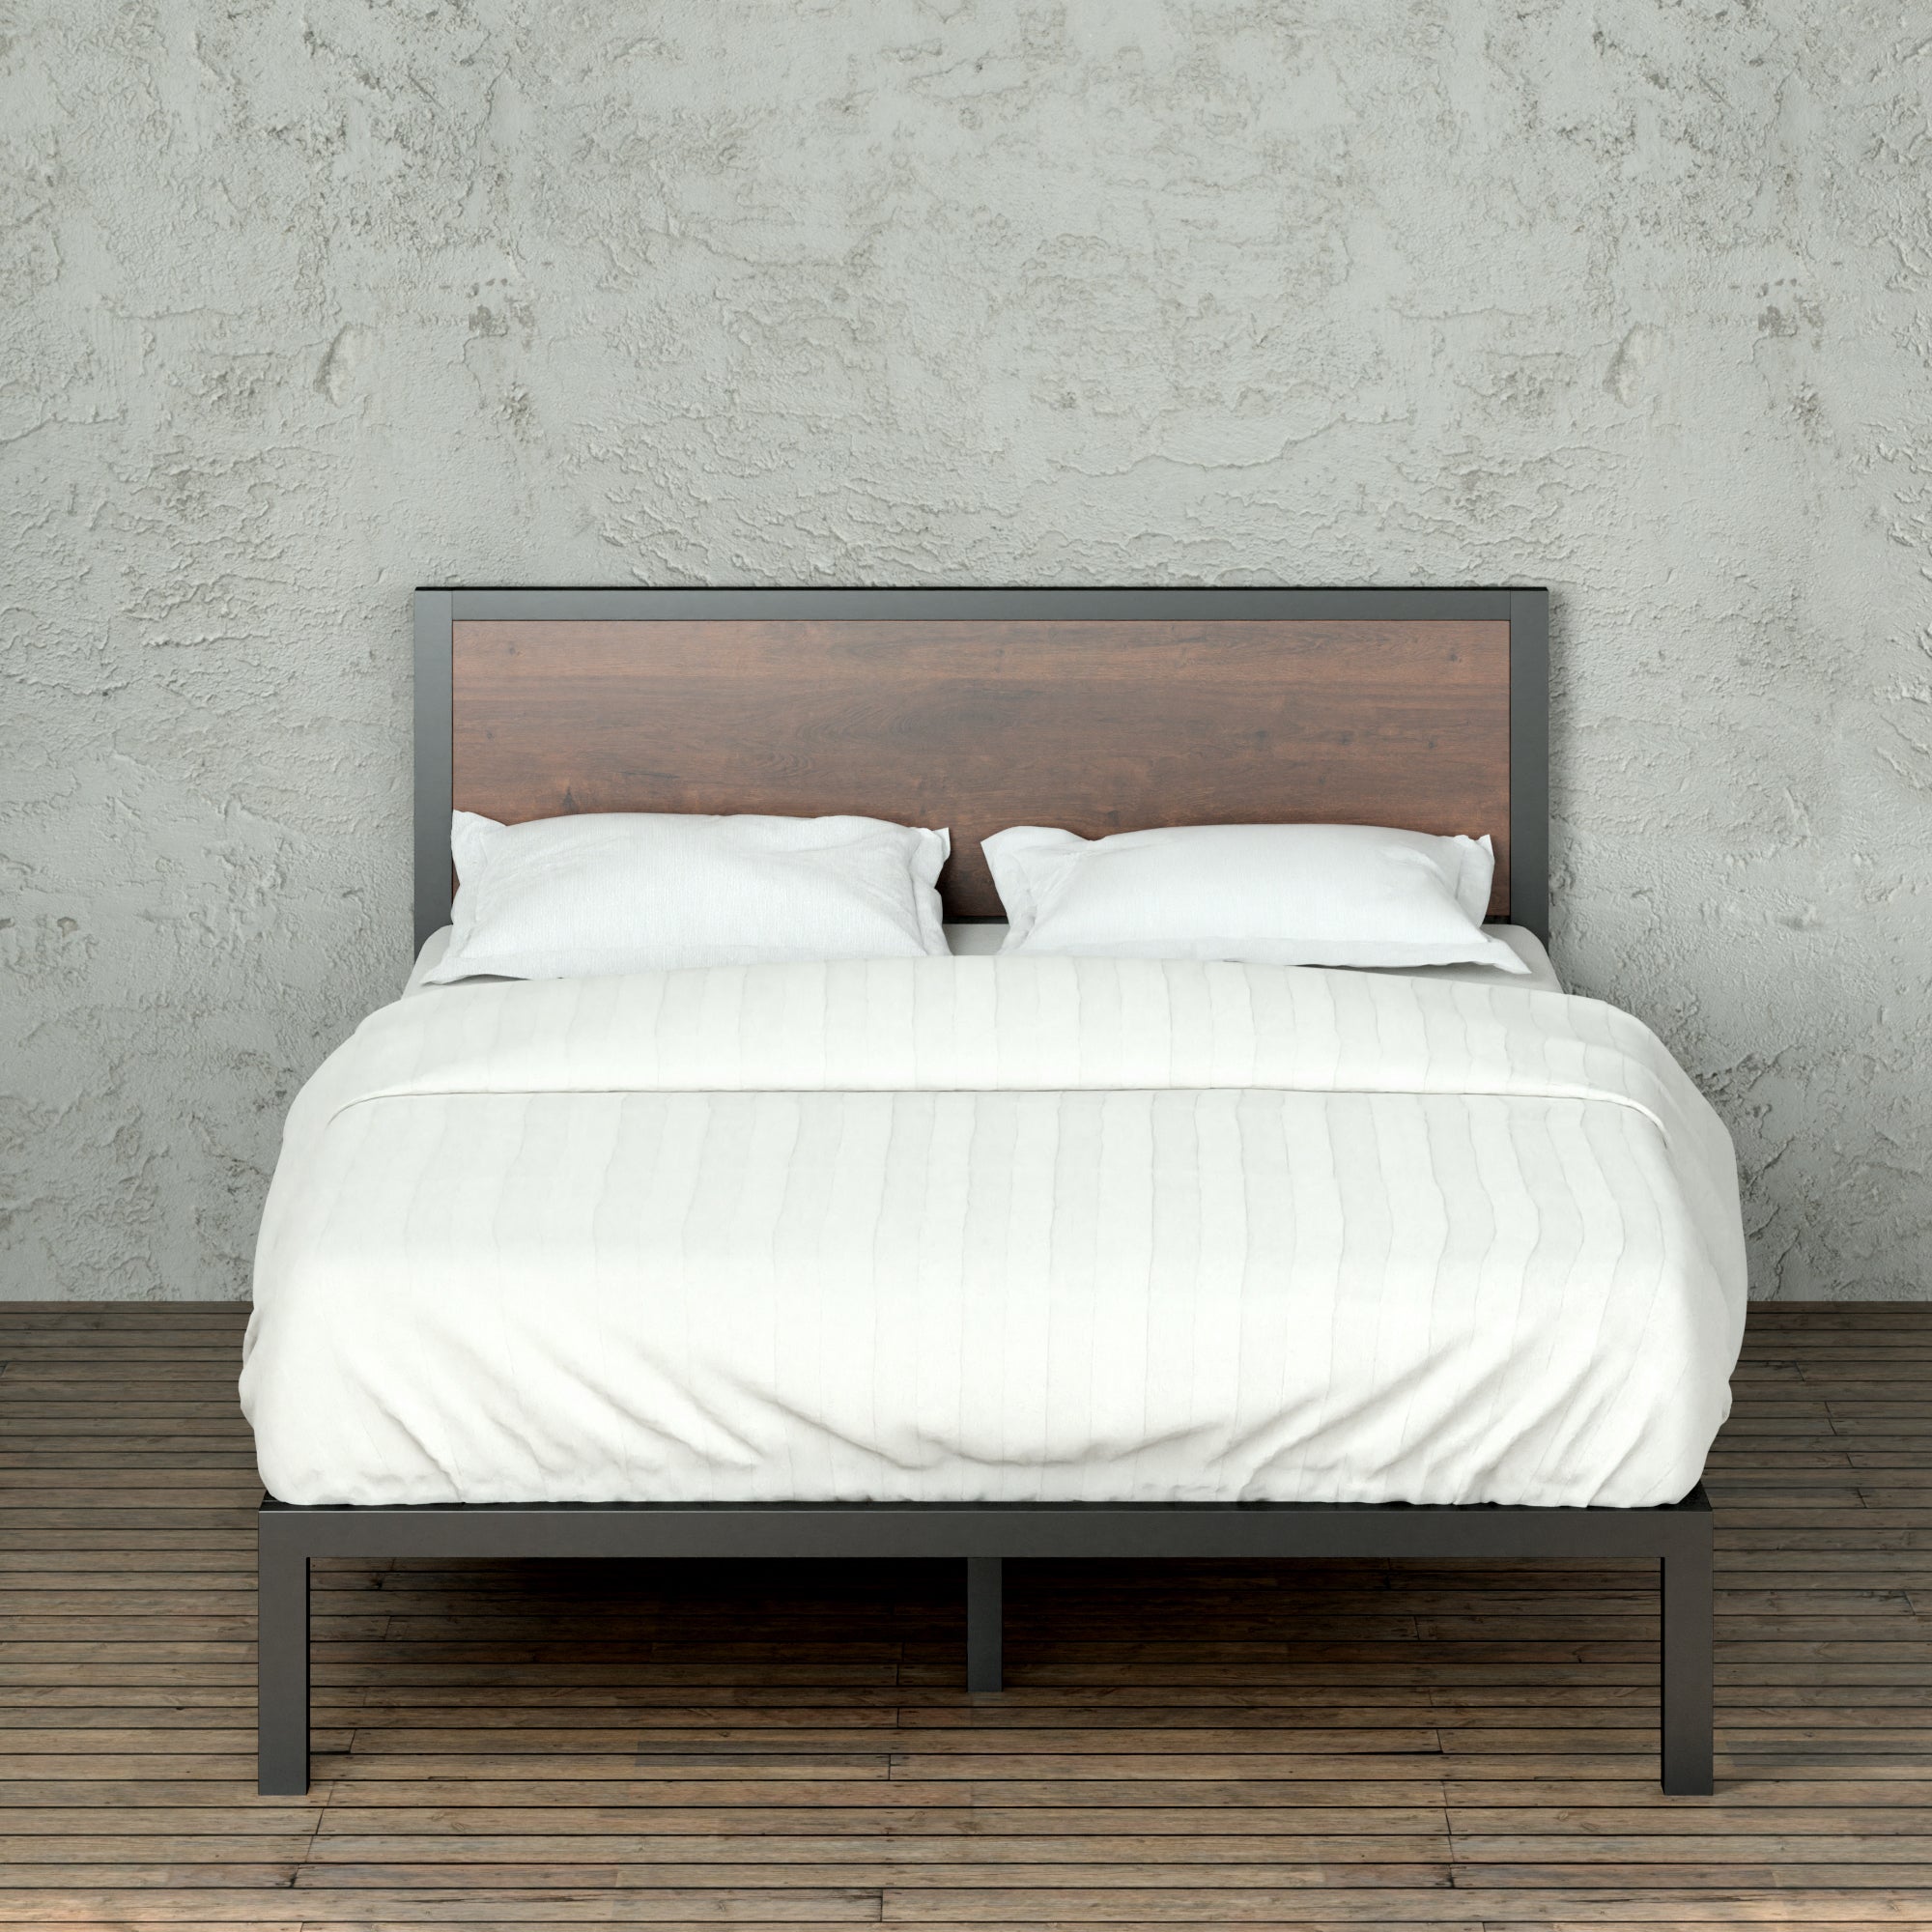 Mory Metal And Wood Platform Bed Frame Queen